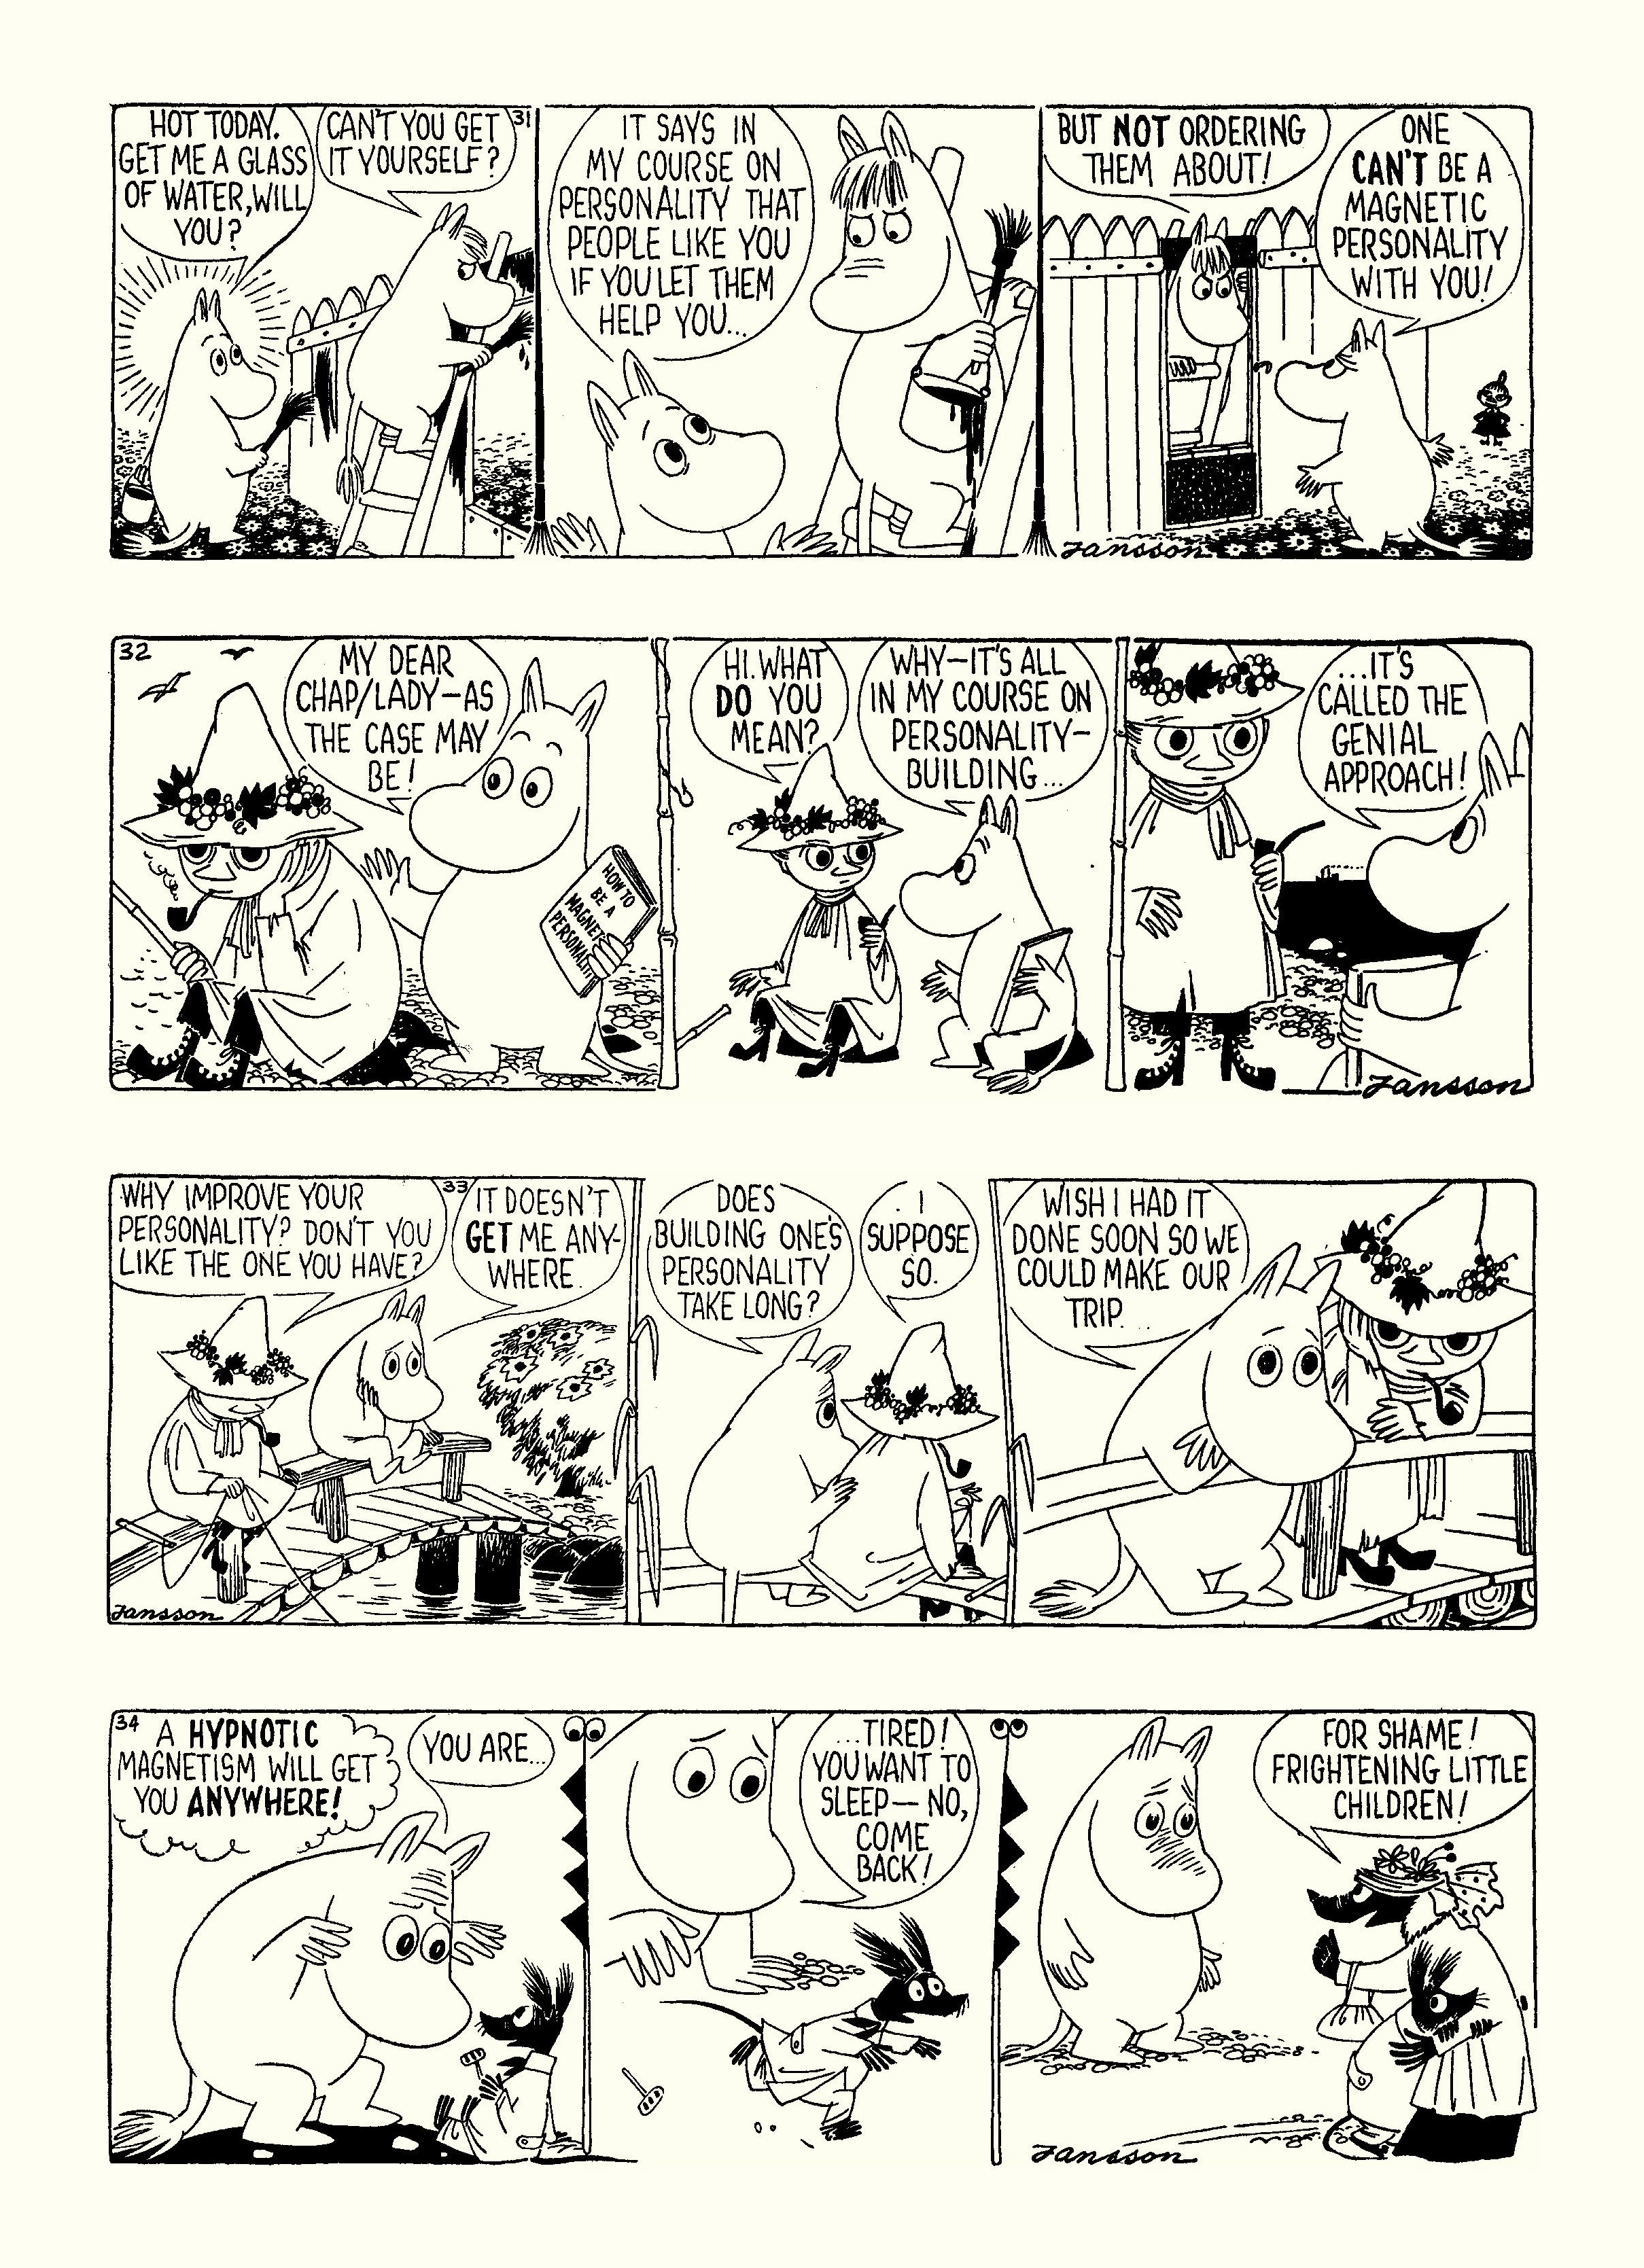 Read online Moomin: The Complete Tove Jansson Comic Strip comic -  Issue # TPB 4 - 45